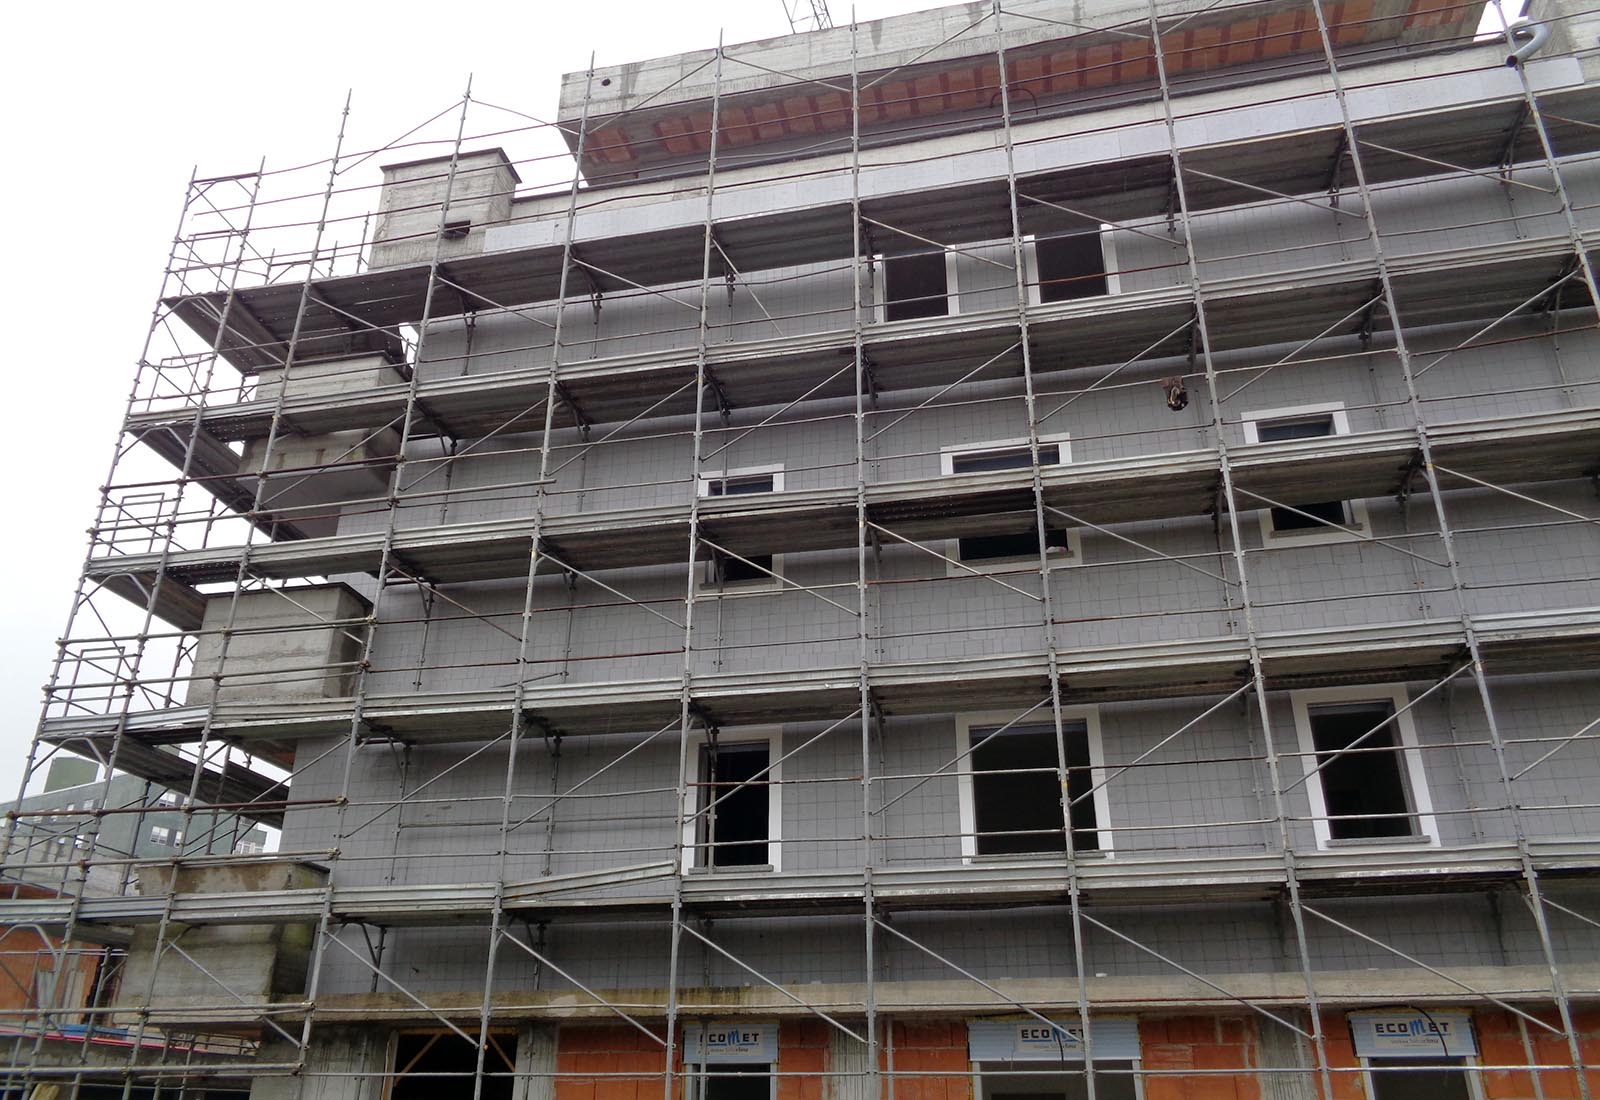 Residential buildings in Biringhello street in Rho - The insulation of the façade